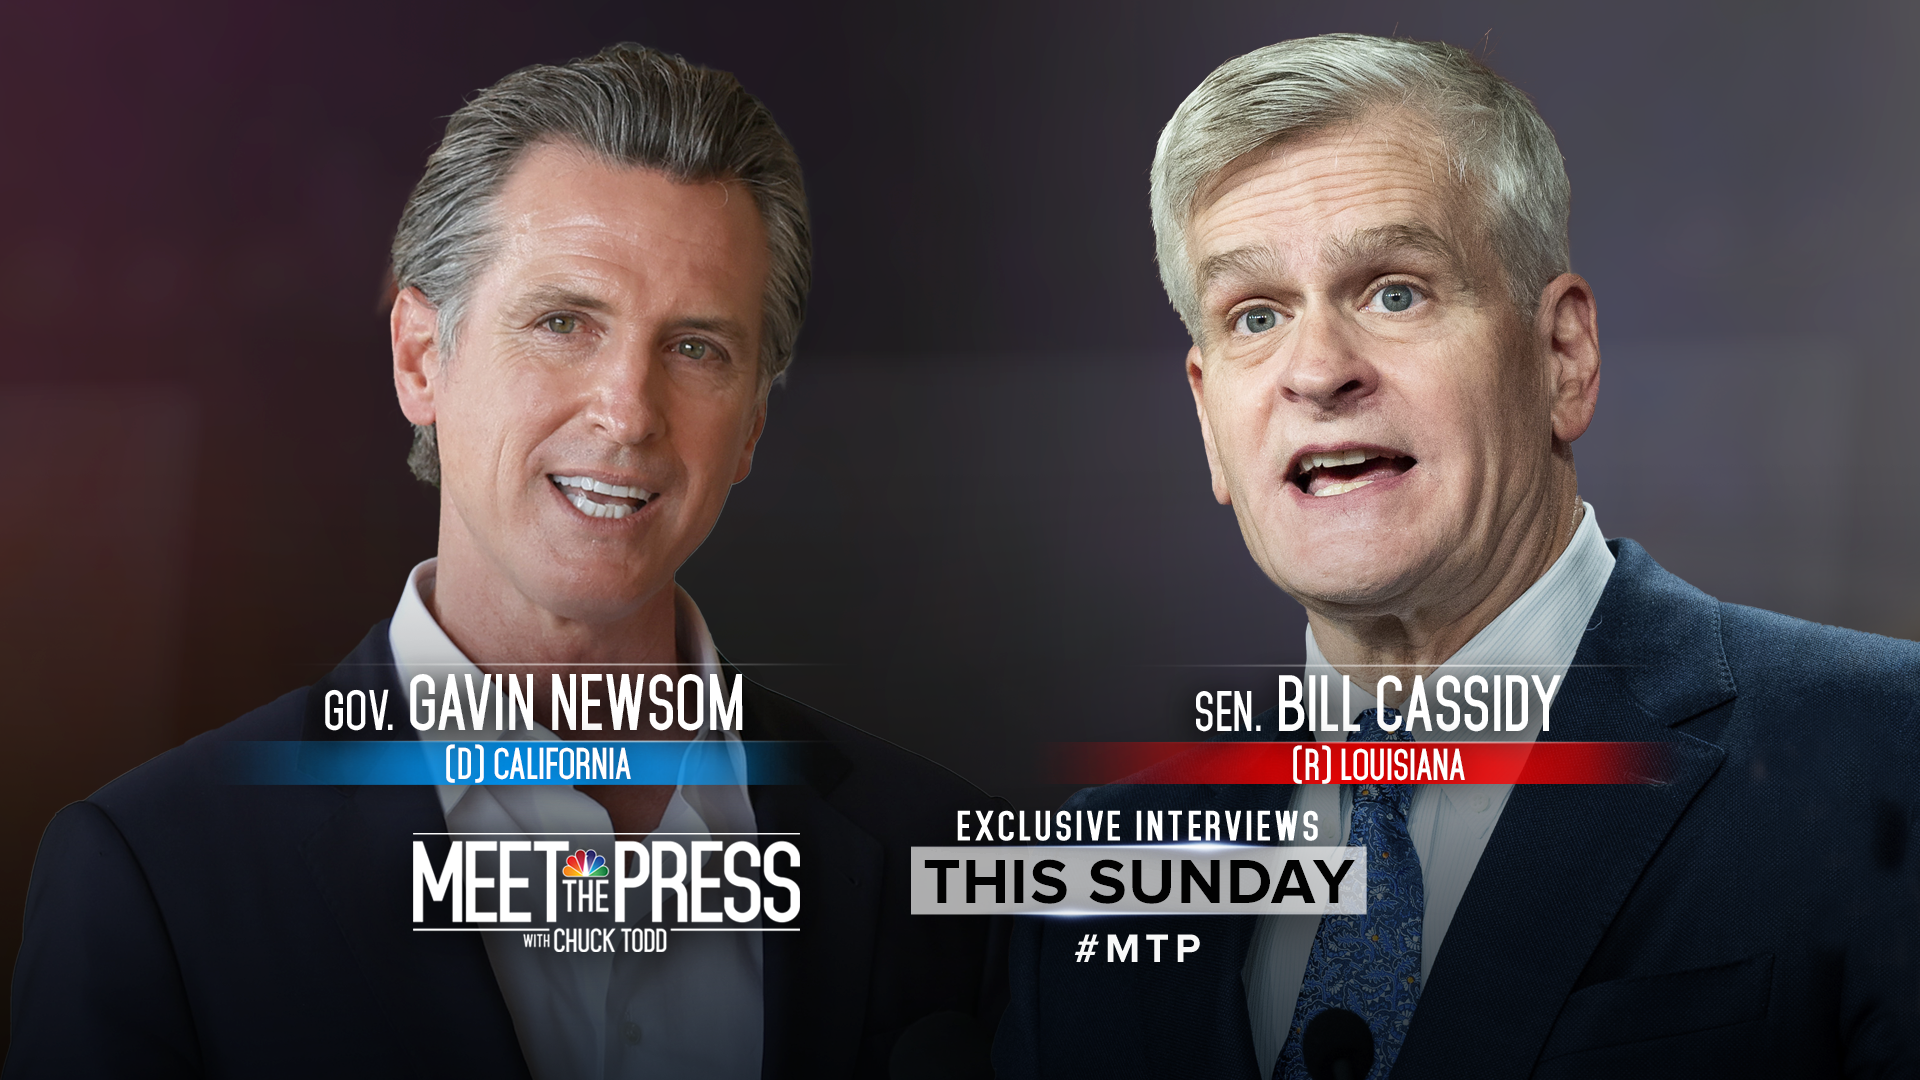 EXCLUSIVE INTERVIEWS WITH SEN. BILL CASSIDY AND GOV. GAVIN NEWSOM THIS SUNDAY ON “MEET THE PRESS WITH CHUCK TODD”